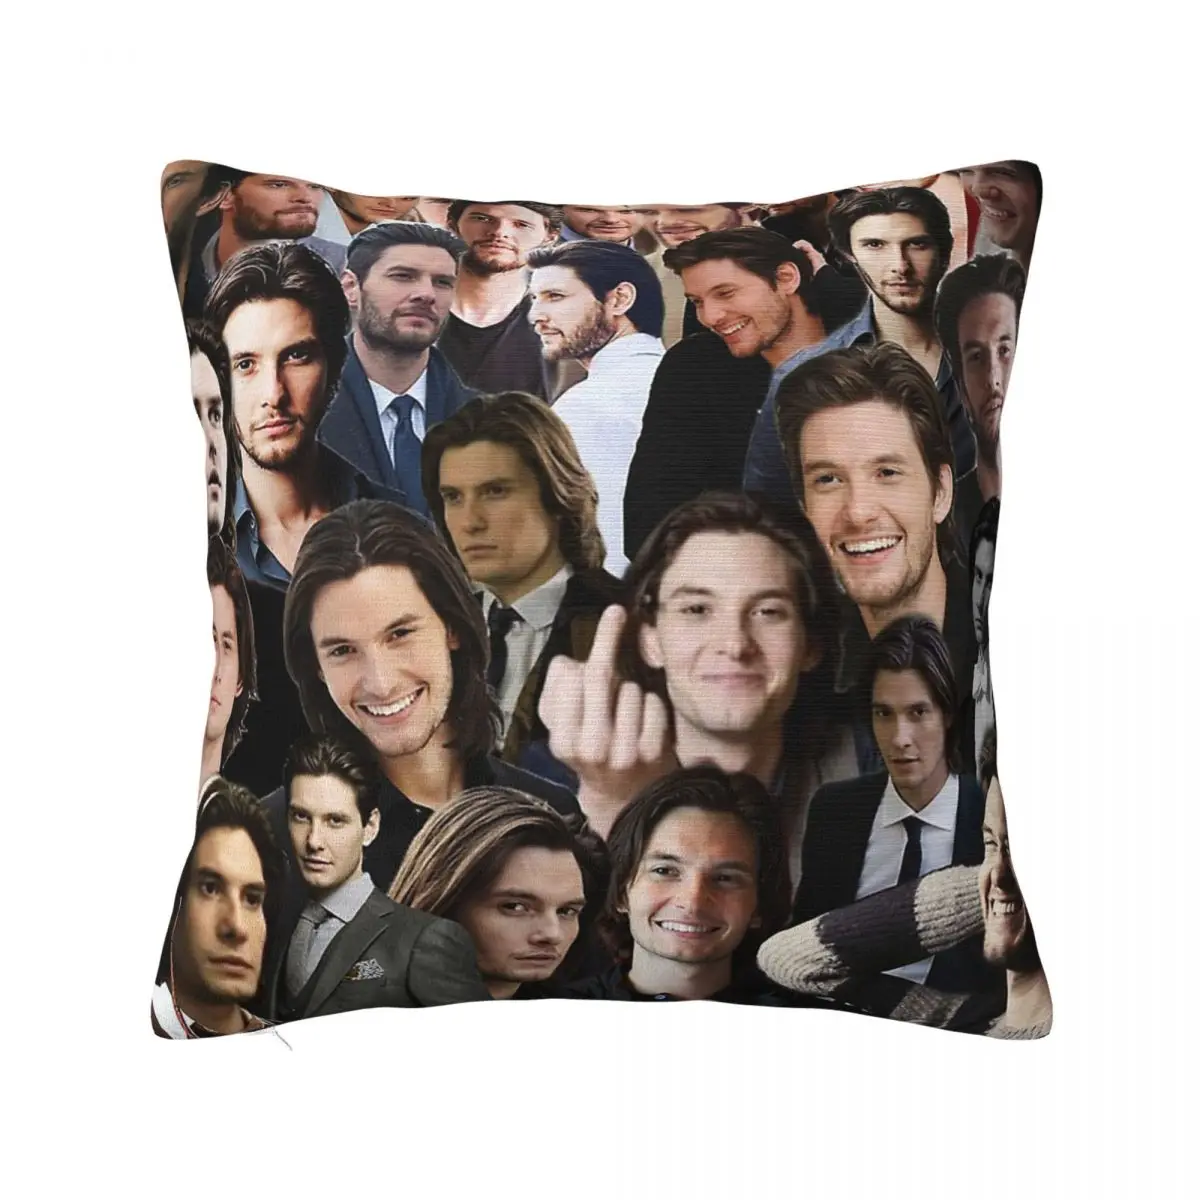 

Ben Barnes Plaid Pillowcase Printed Polyester Cushion Cover Decor Actor Collage Pillow Case Cover Bedroom Zippered 18"